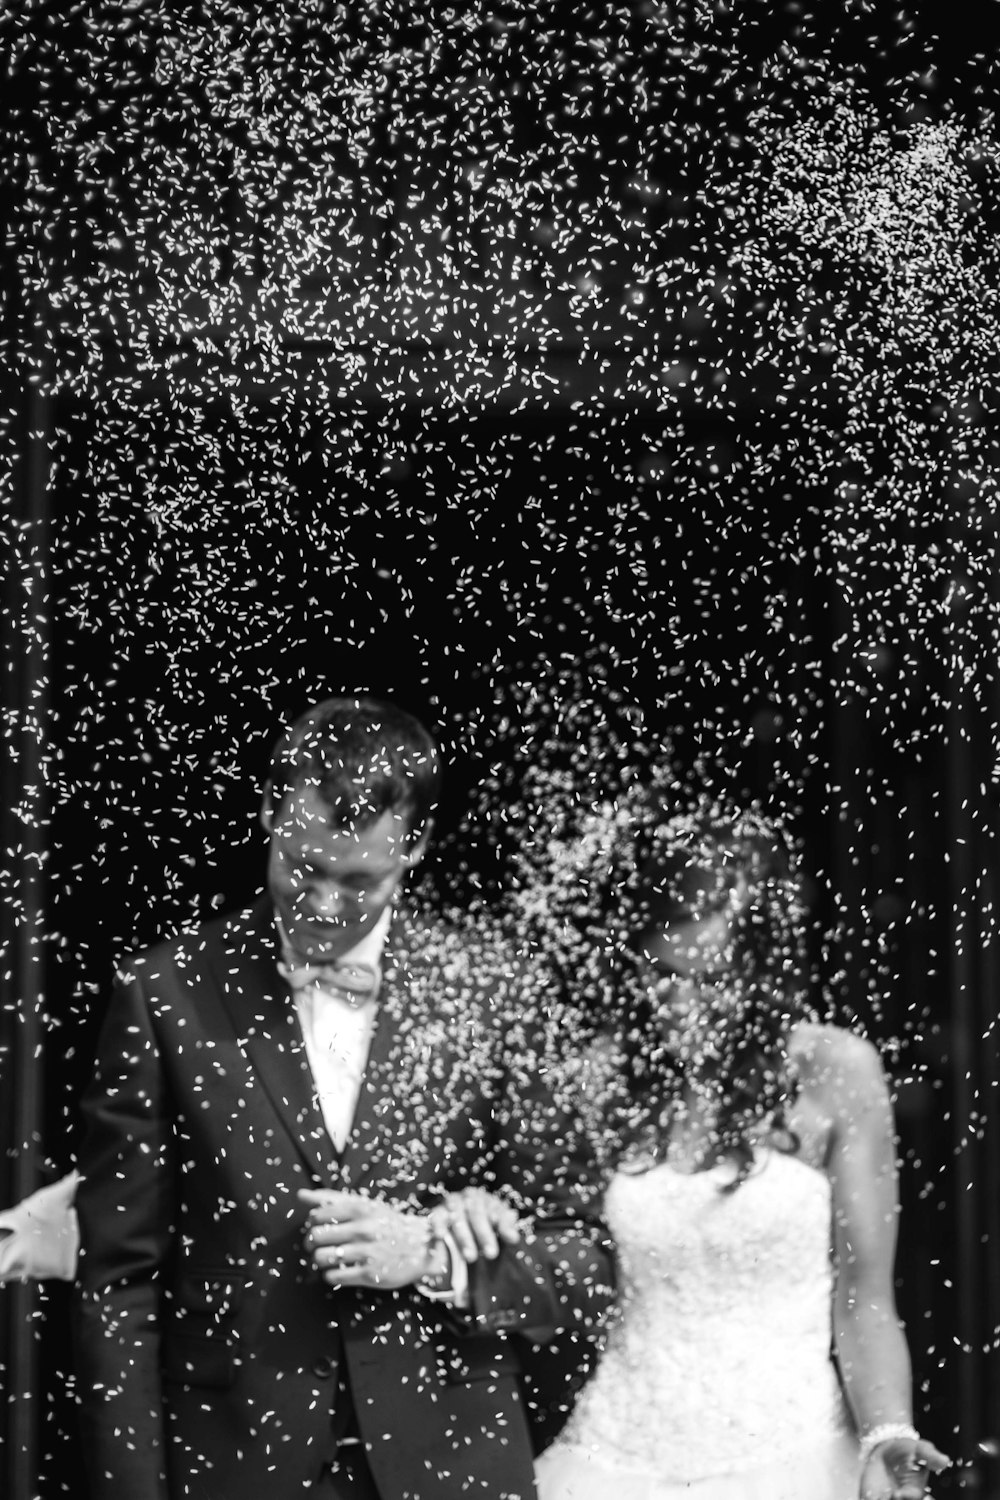 Unsplash search for wedding. Bride and groom with rice thrown.